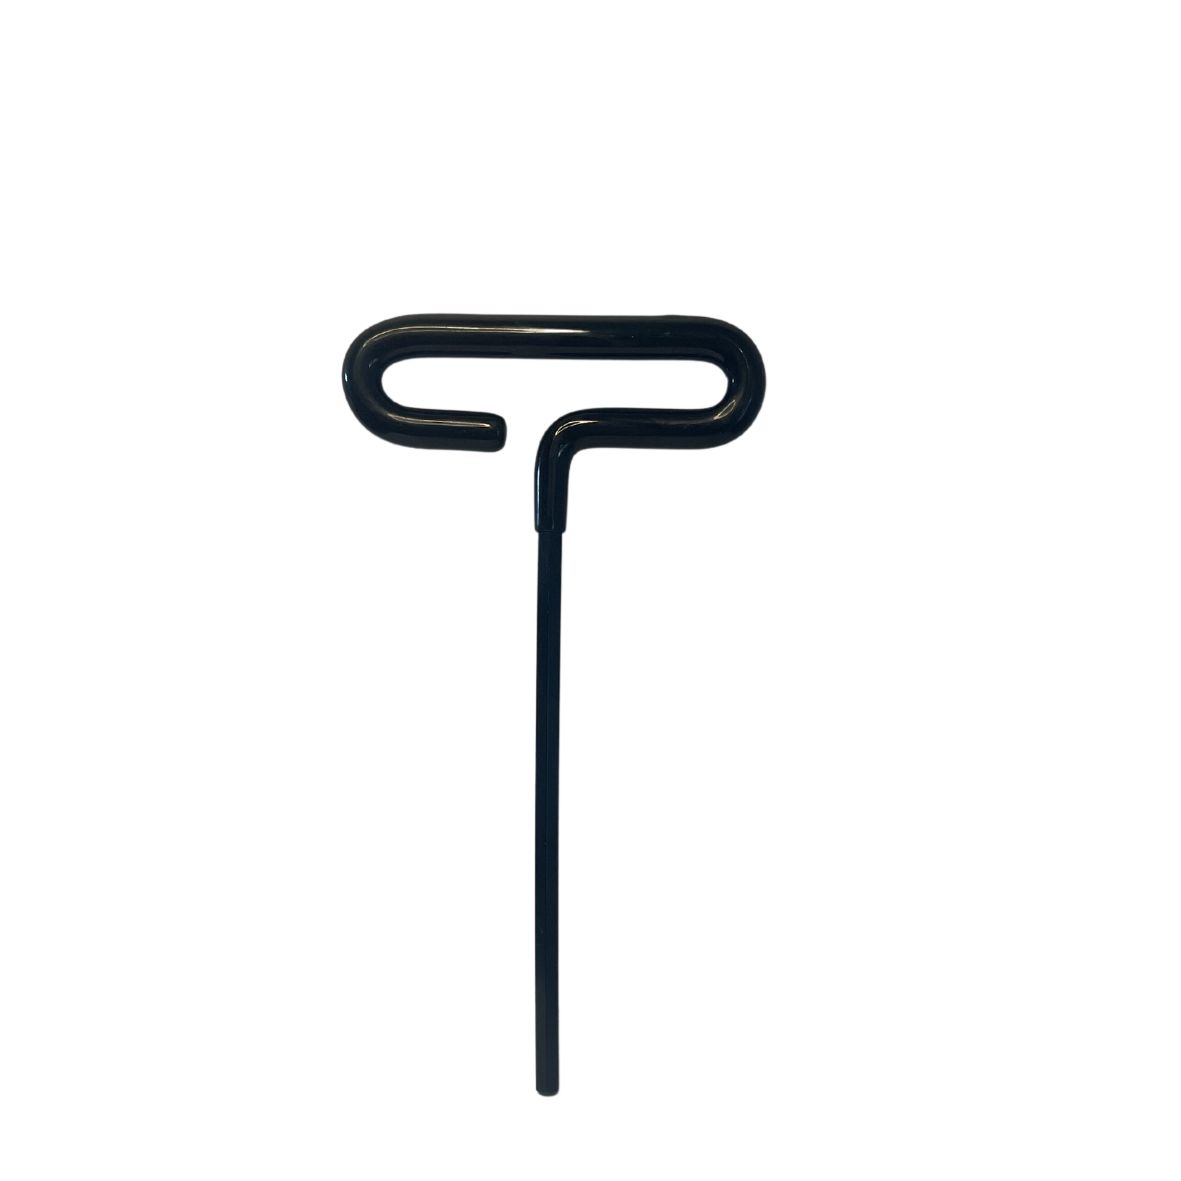 Allen Key suitable for NordicTrack and Pro-Form Treadmills